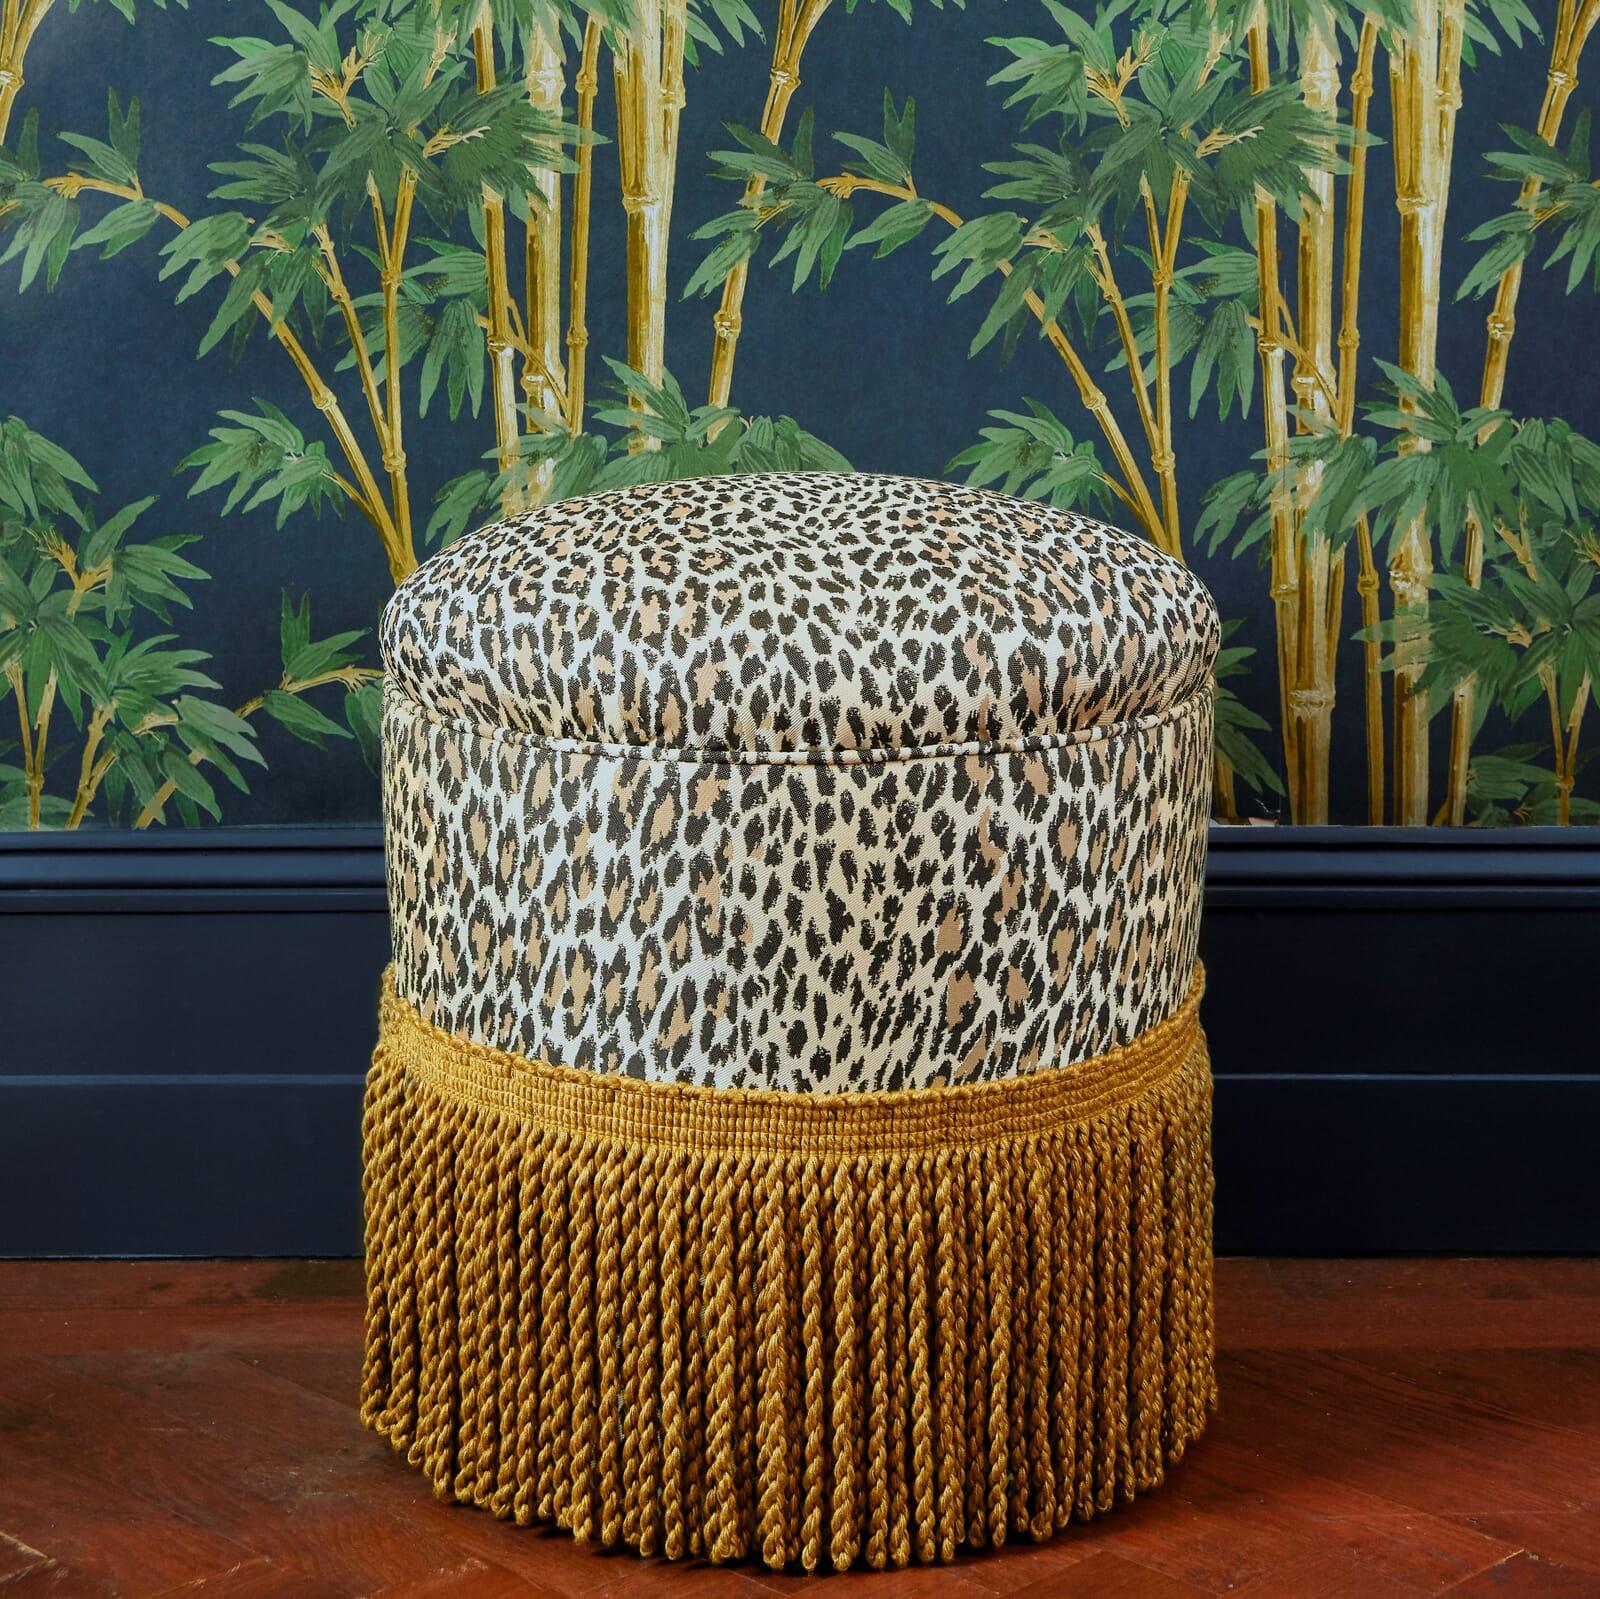 An ottoman to sit your bottom on? House of Hackney's new 'Bottomans' work just as well as elegant footstools as they do occasional seating. This version is upholstered in WILD CARD jacquard, a modern take on the timeless leopard spot. Positioned as